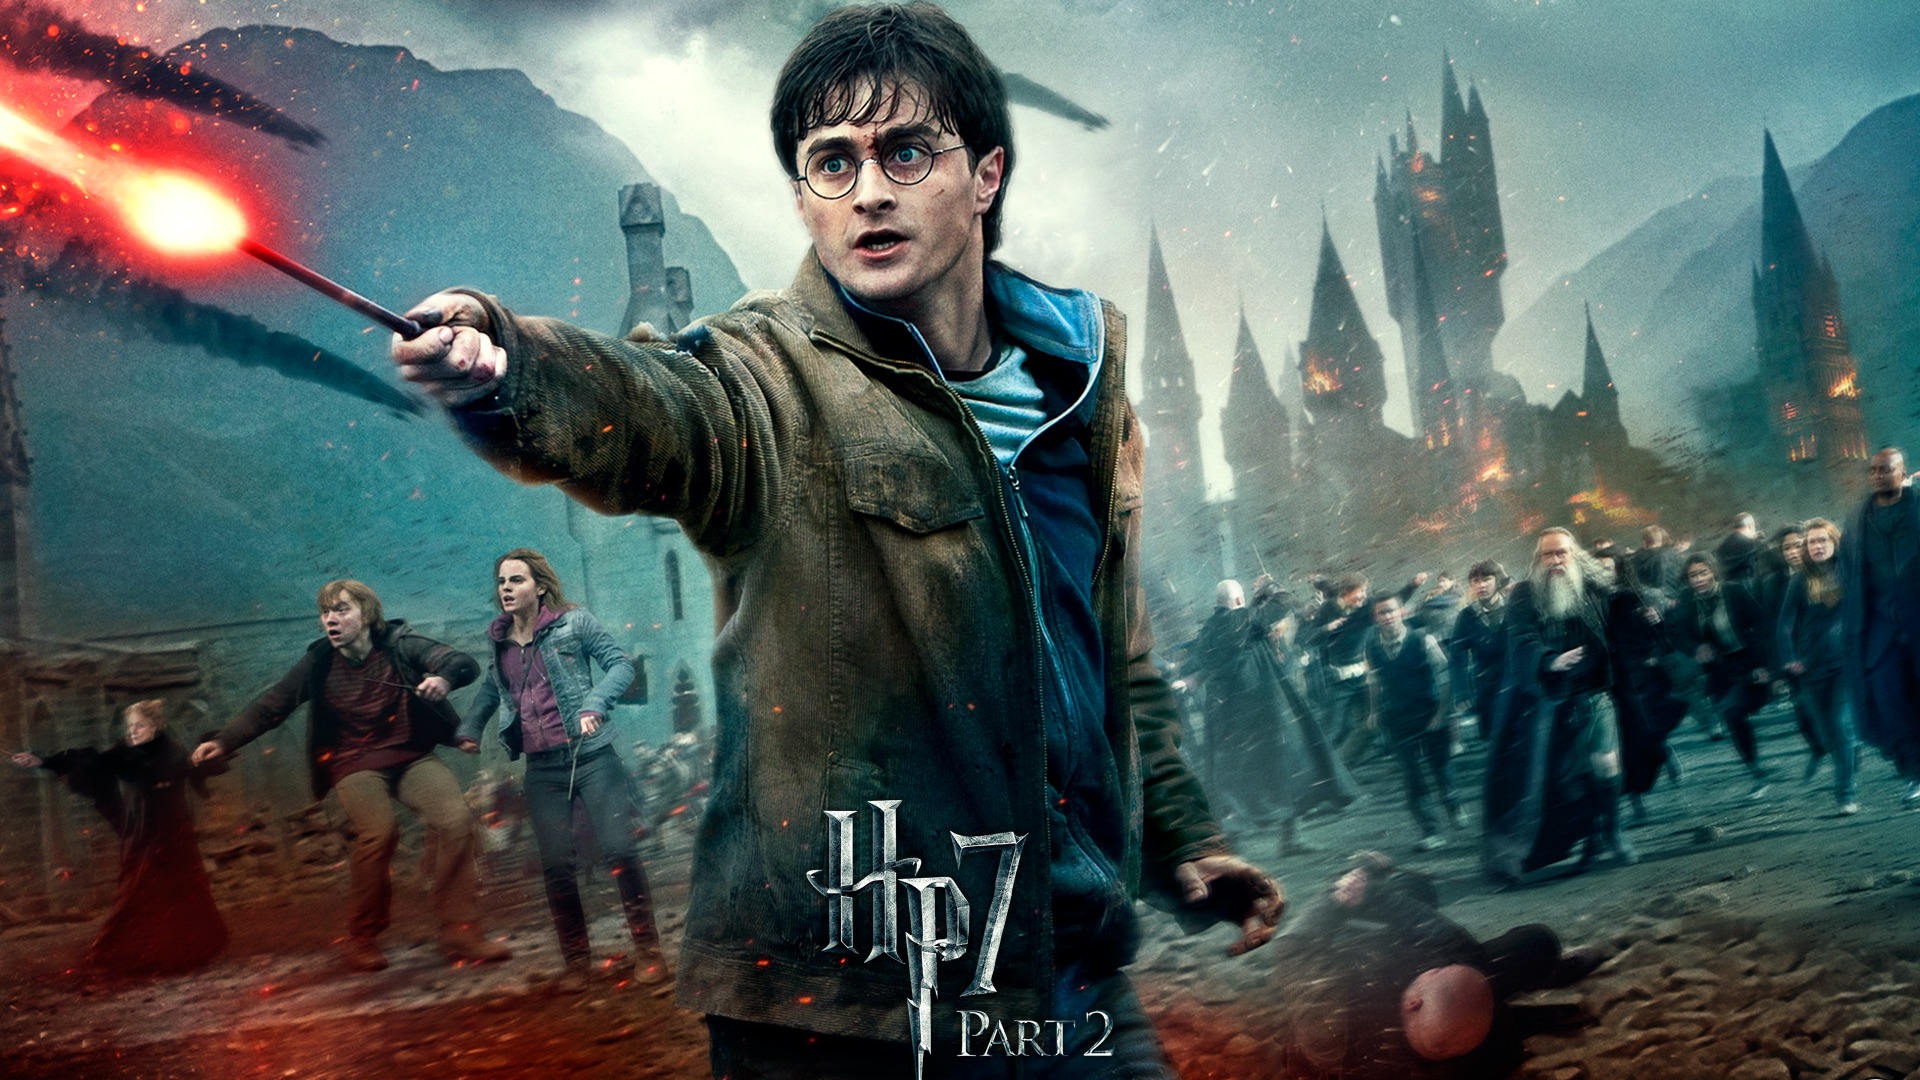 2011 Harry Potter and the Deathly Hallows HD wallpapers #20 - 1920x1080